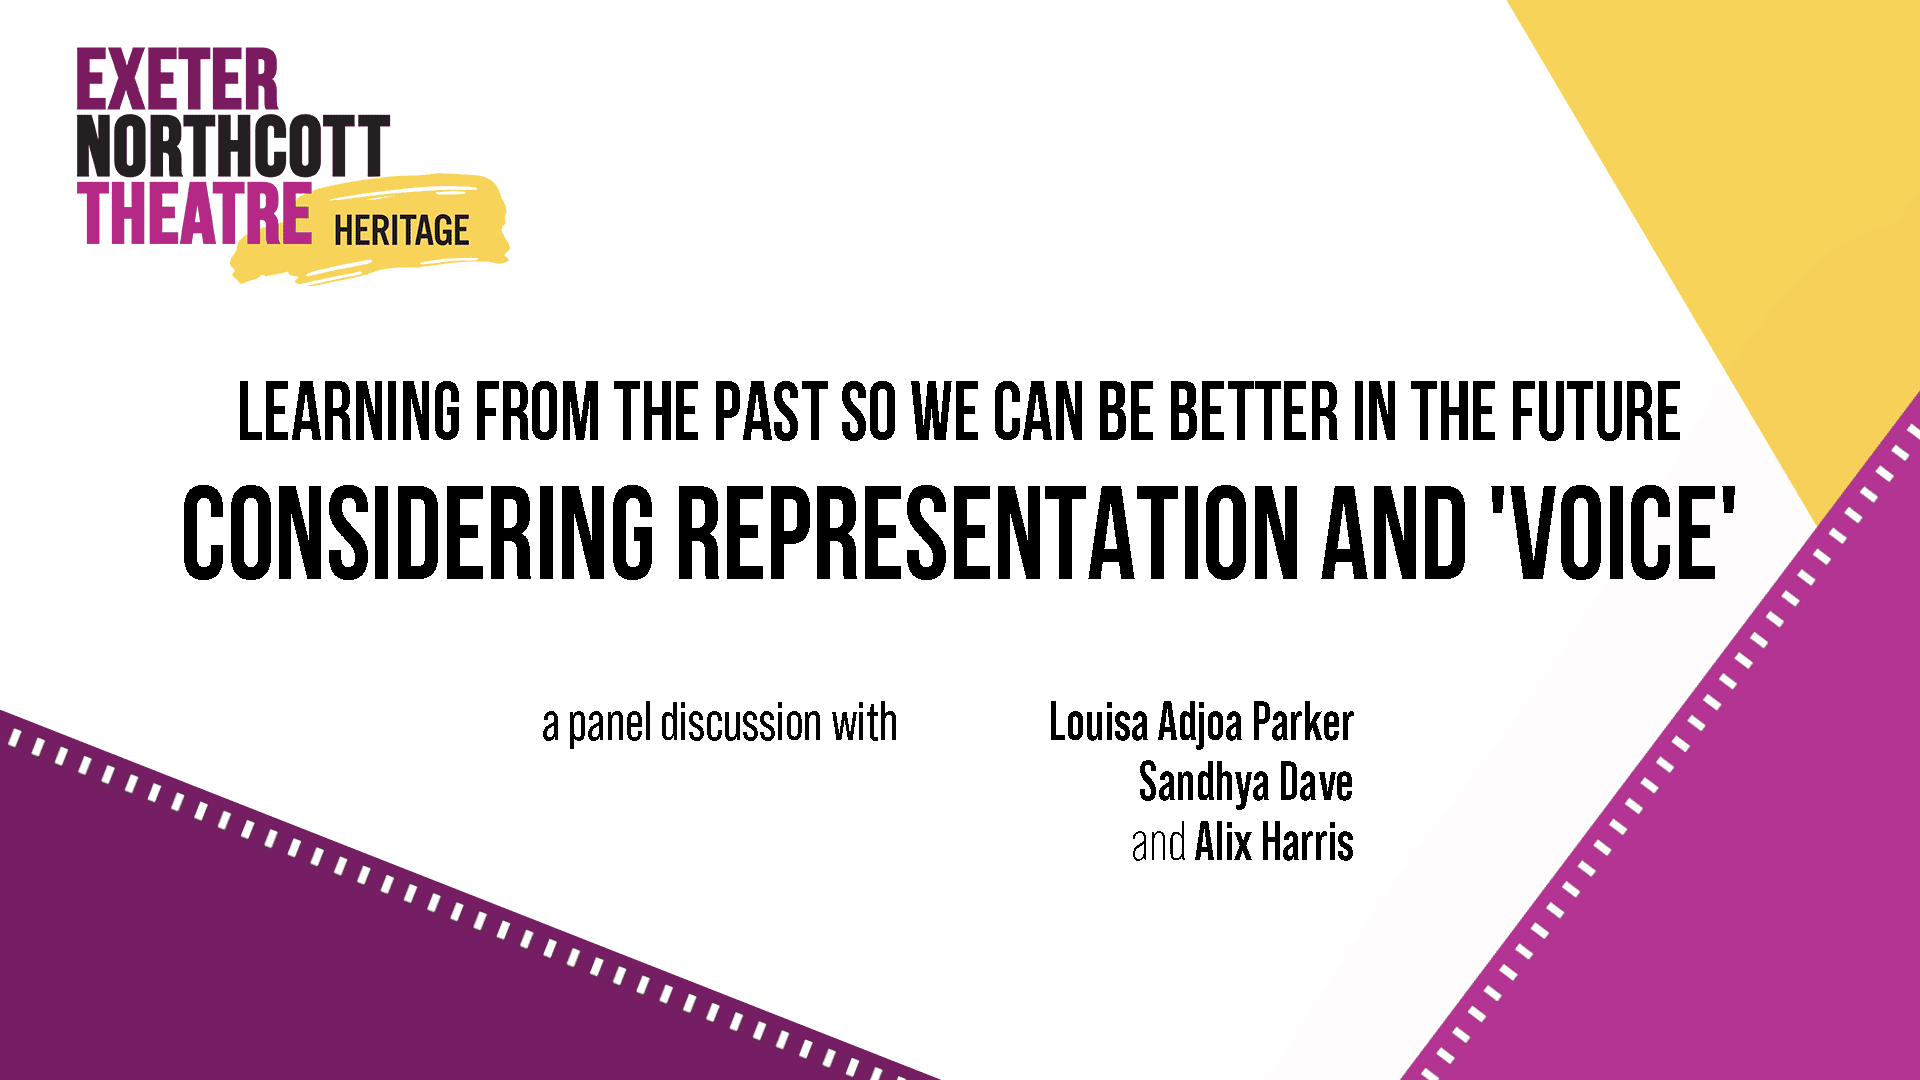 Exeter Northcott Theatre Heritage - Learning from the past so we can be better in the future: Considering representation and 'voice' free panel event with Louisa Adjoa Parker, Alix Harris and Sandhya Dave 8 June 7pm, online